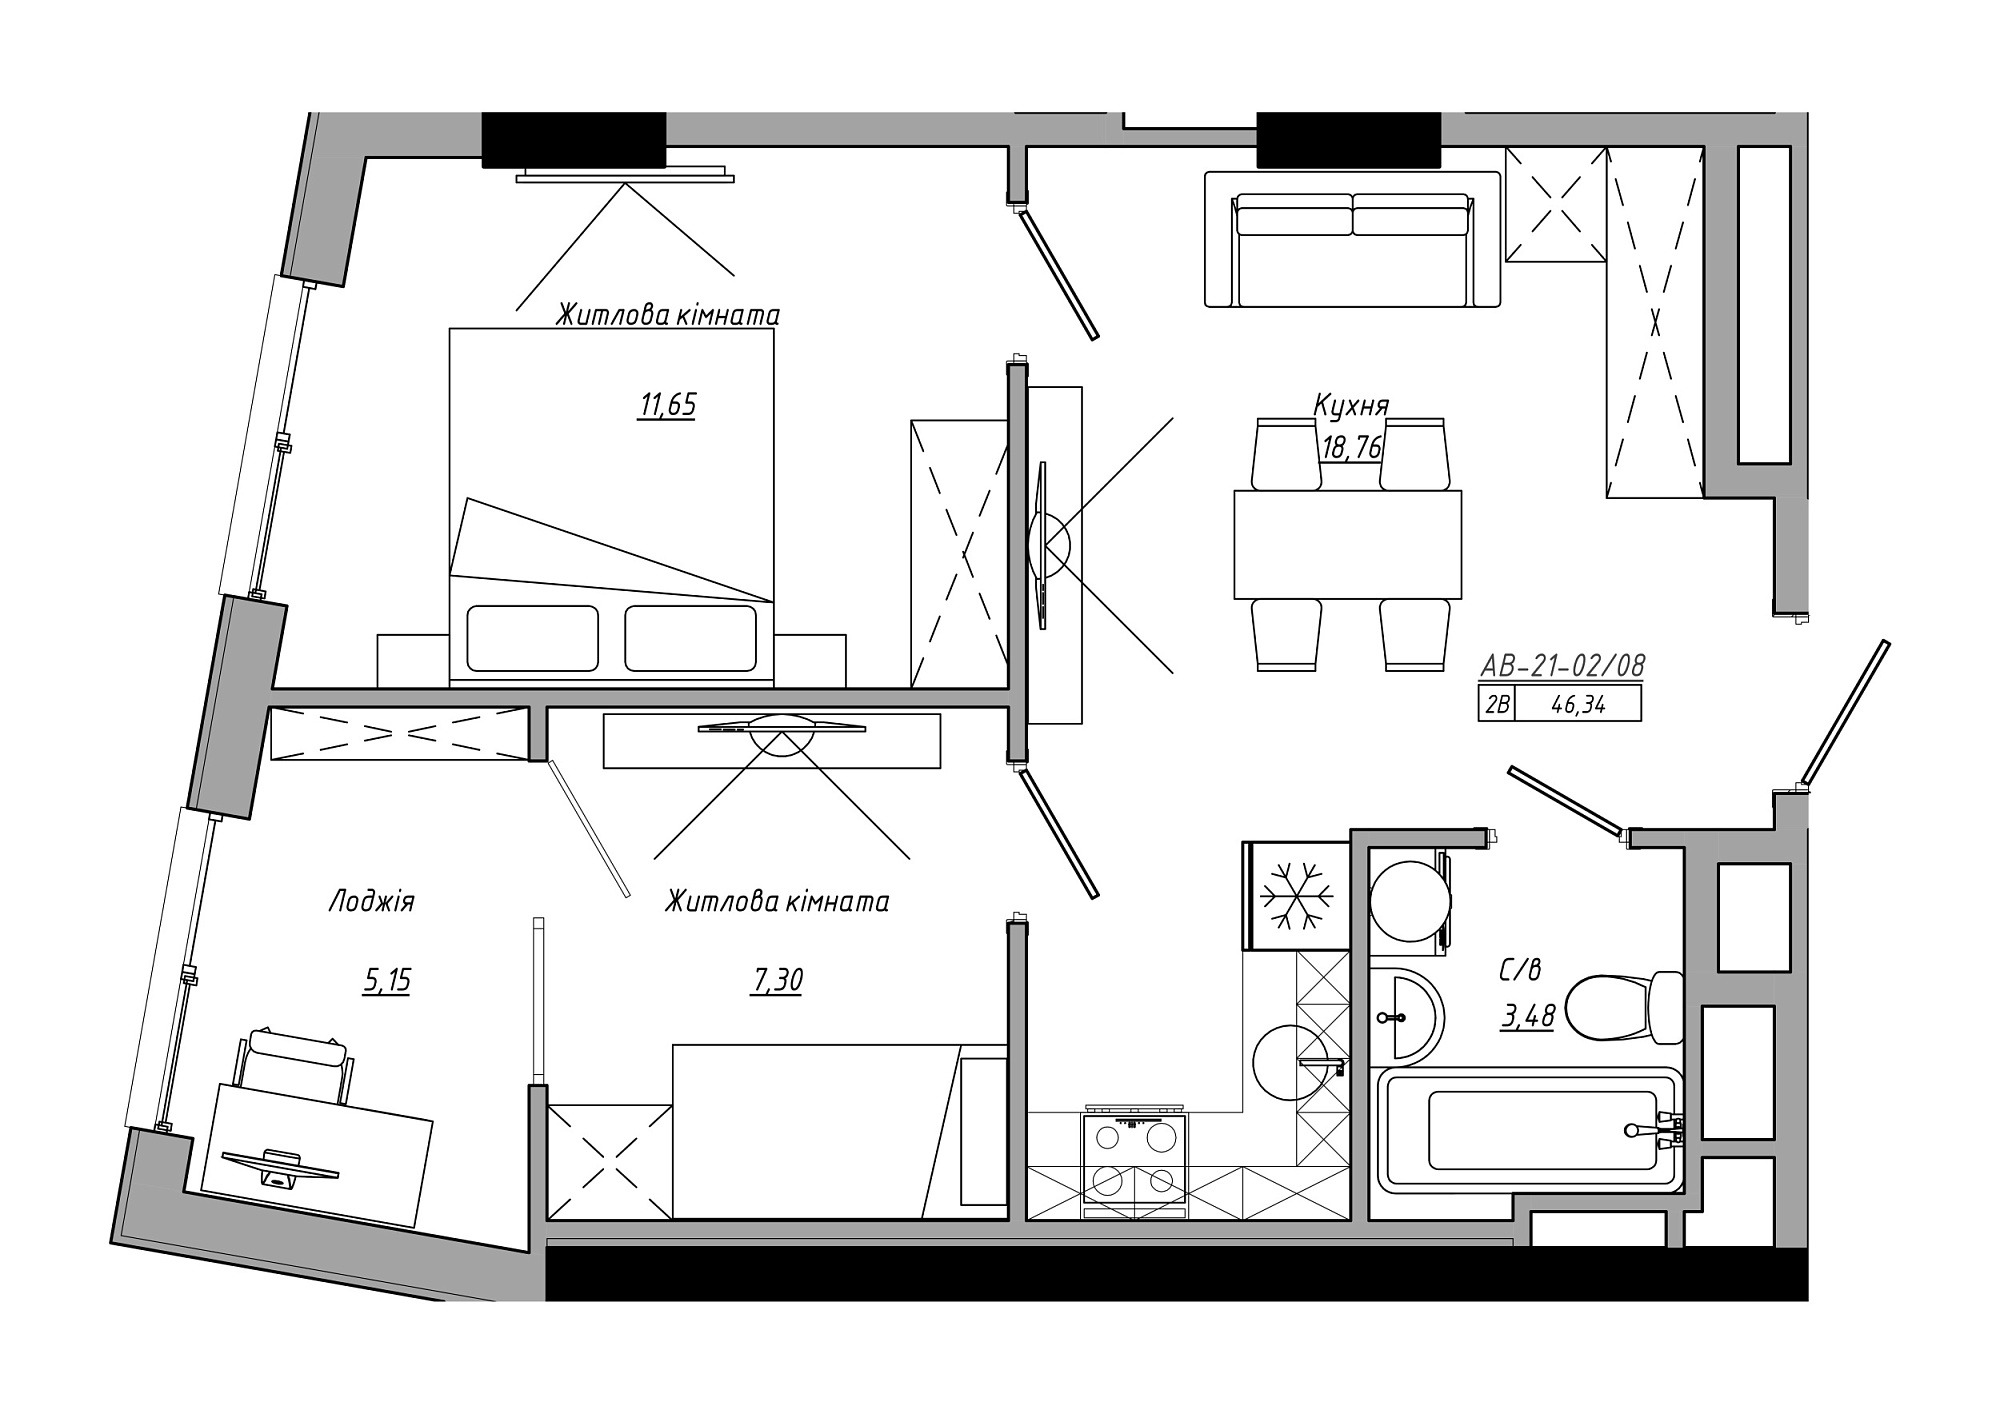 Planning 2-rm flats area 46.34m2, AB-21-02/00008.